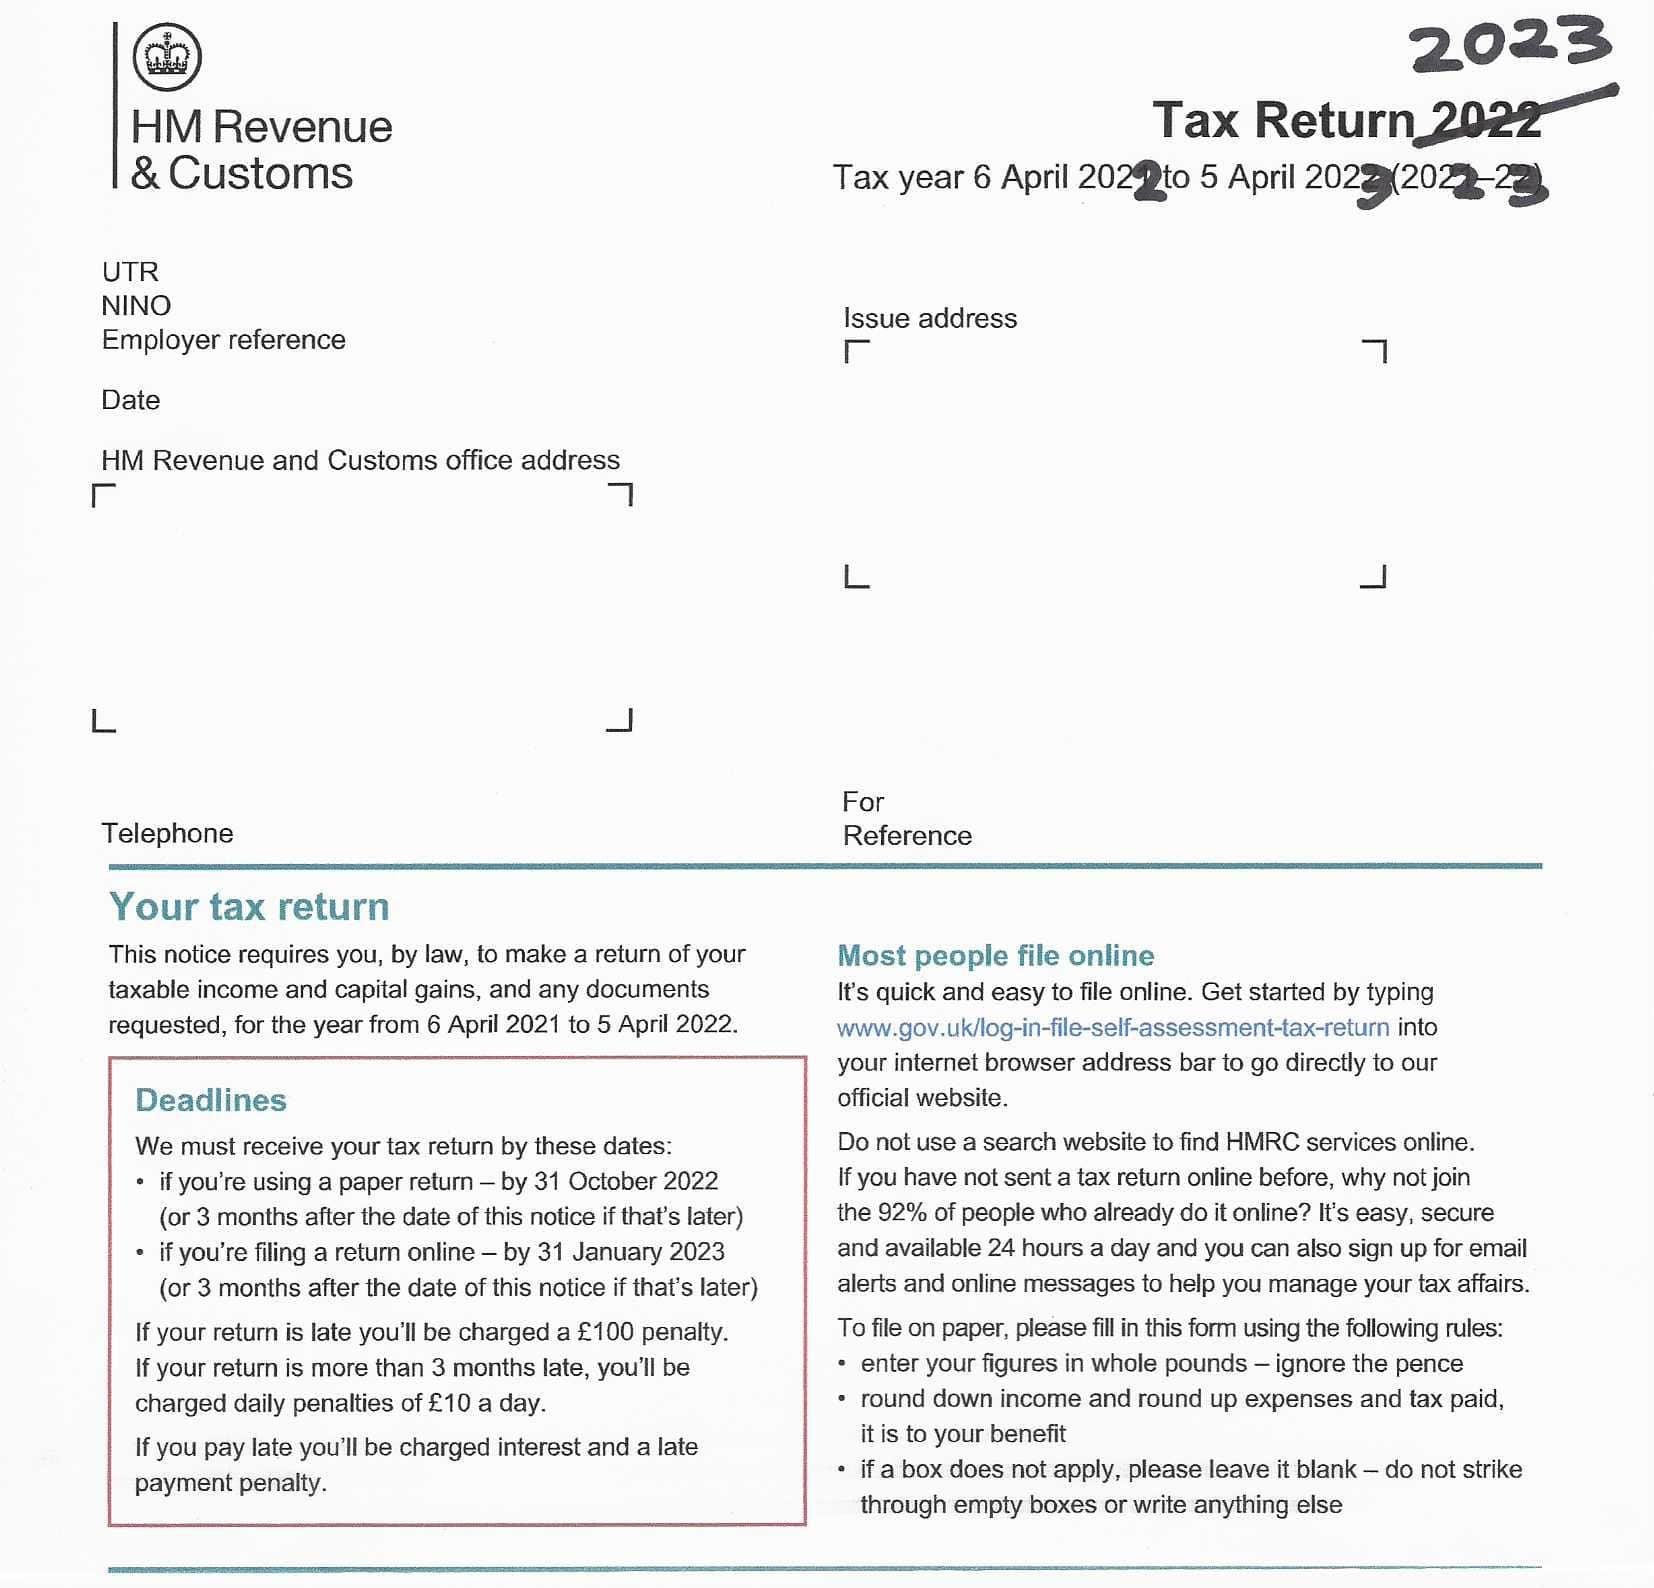 trying-to-locate-the-2023-hmrc-paper-tax-return-form-online